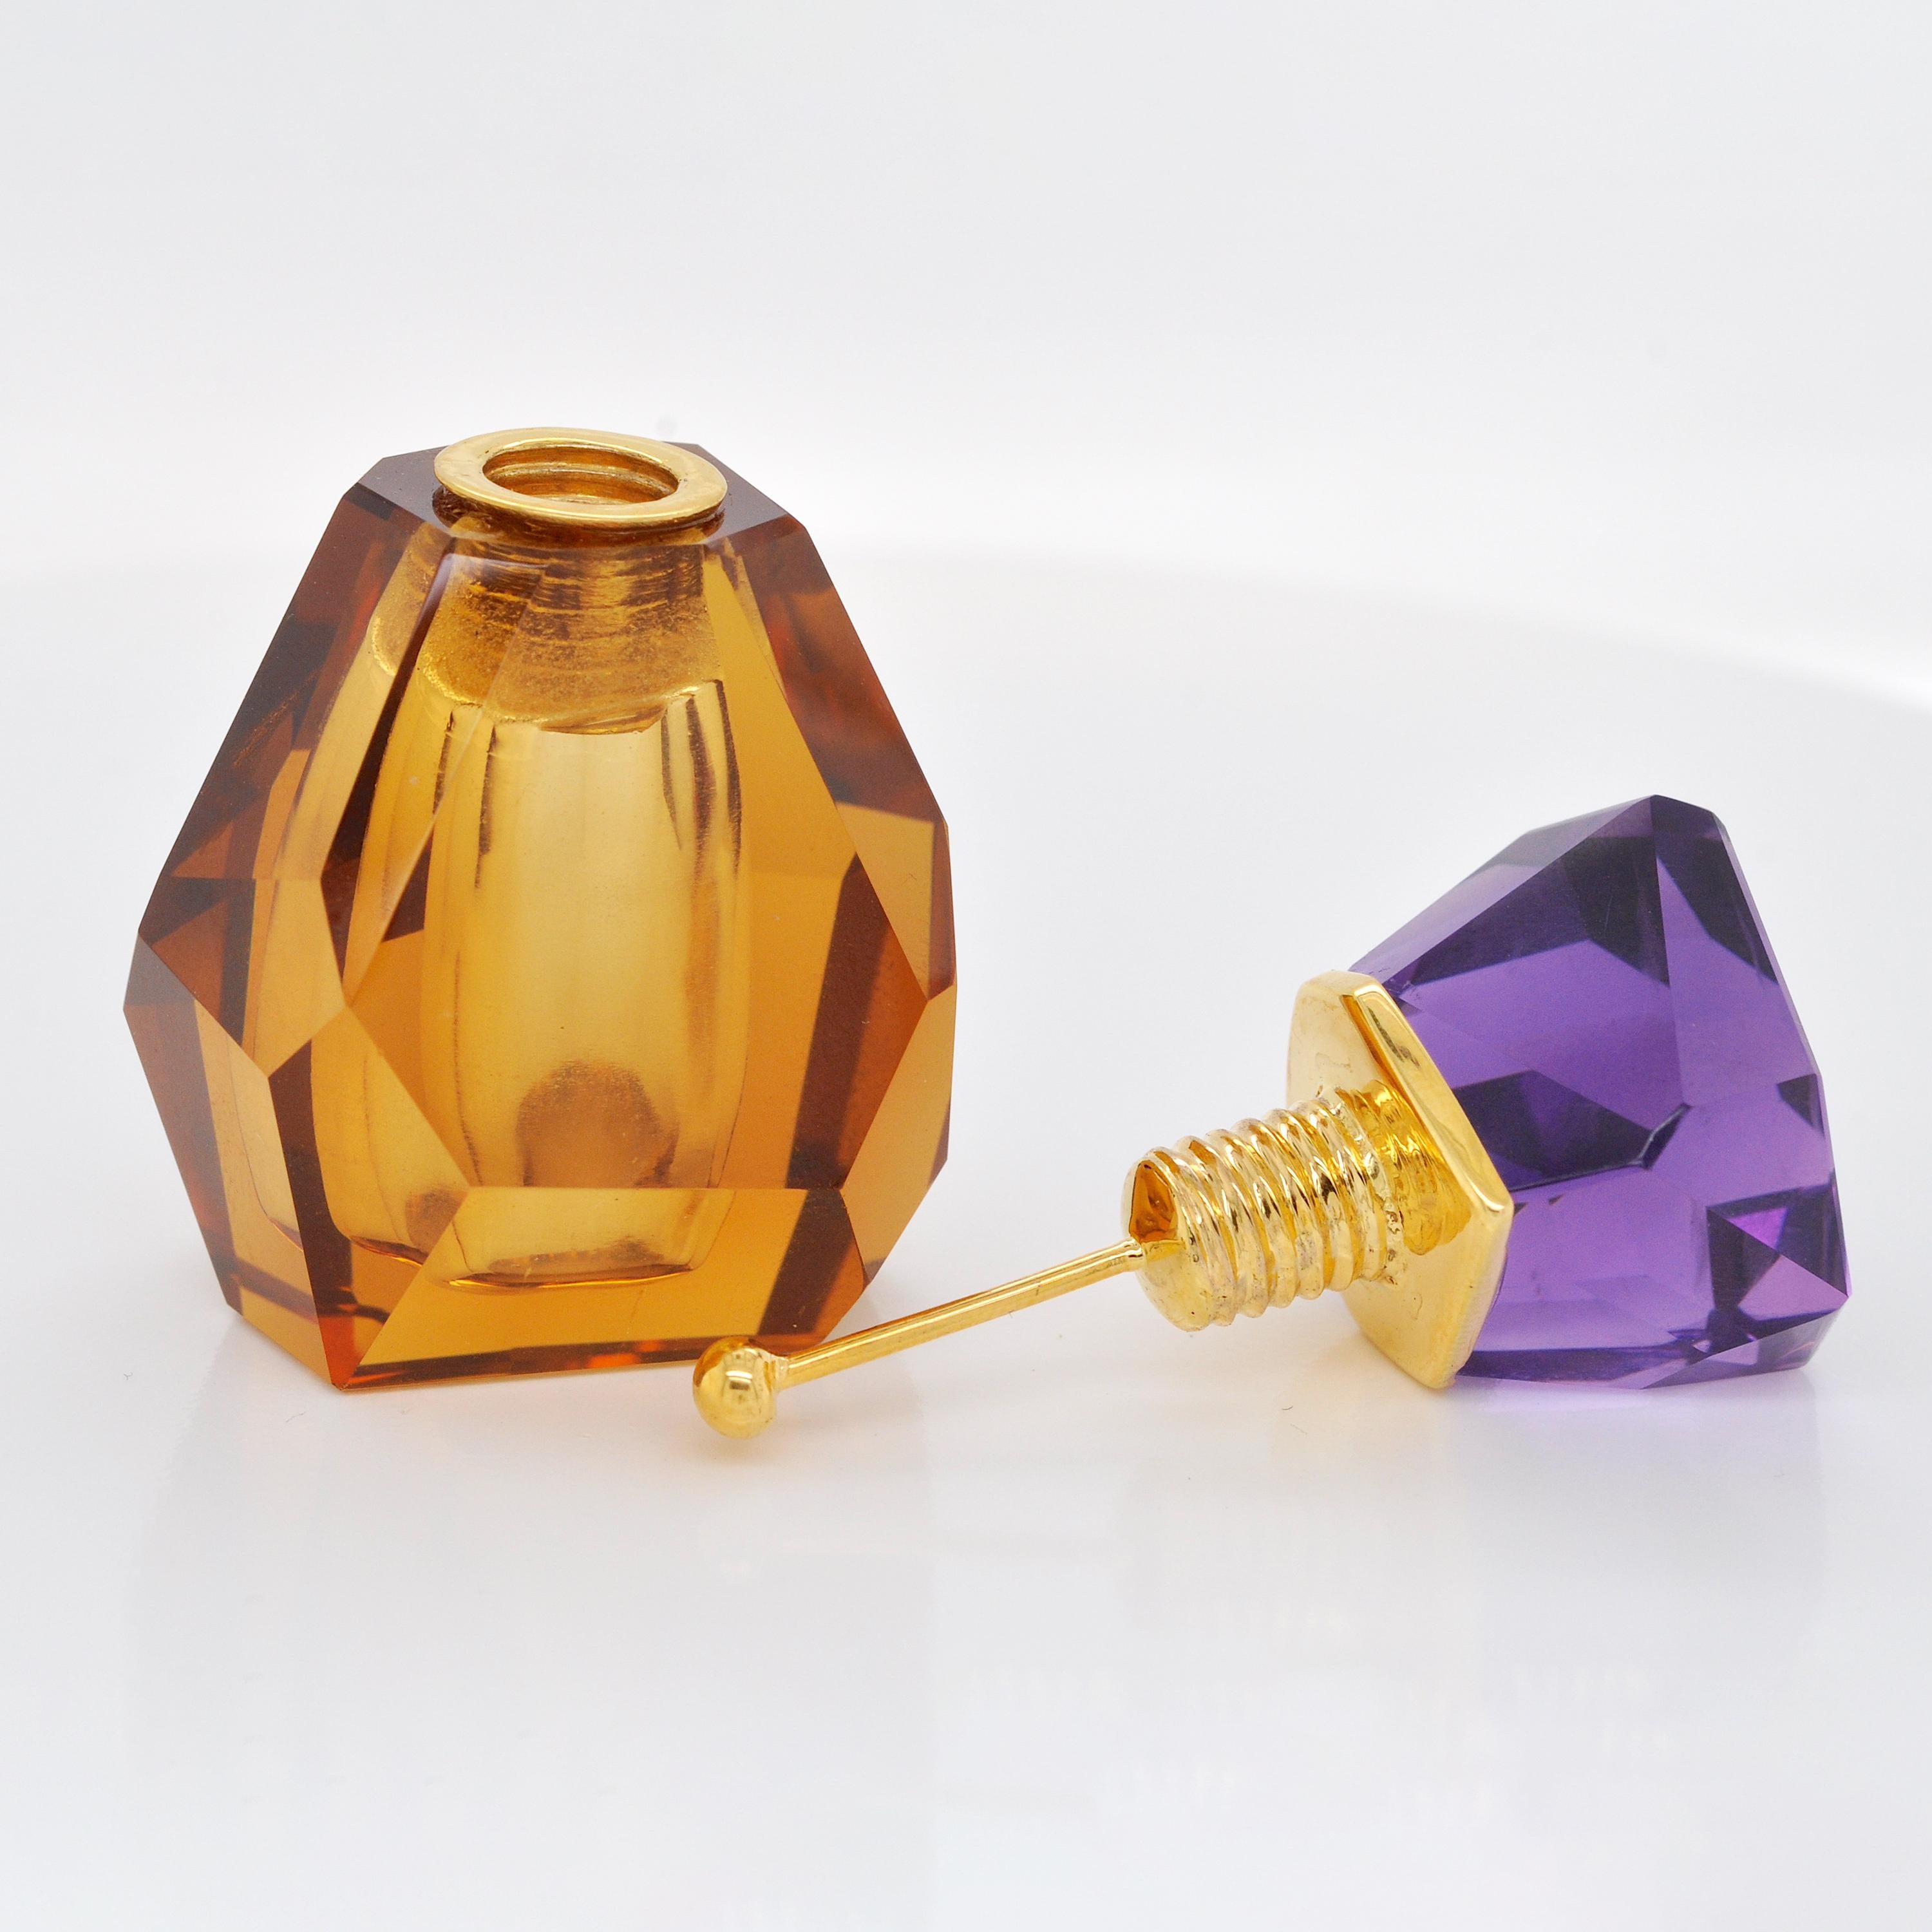 Enter a world where elegance and convenience converge in our exceptional perfume bottle.

Picture the shimmering glow of abstract faceted golden quartz at the bottle's base, radiating a golden warmth that whispers of timeless charm and